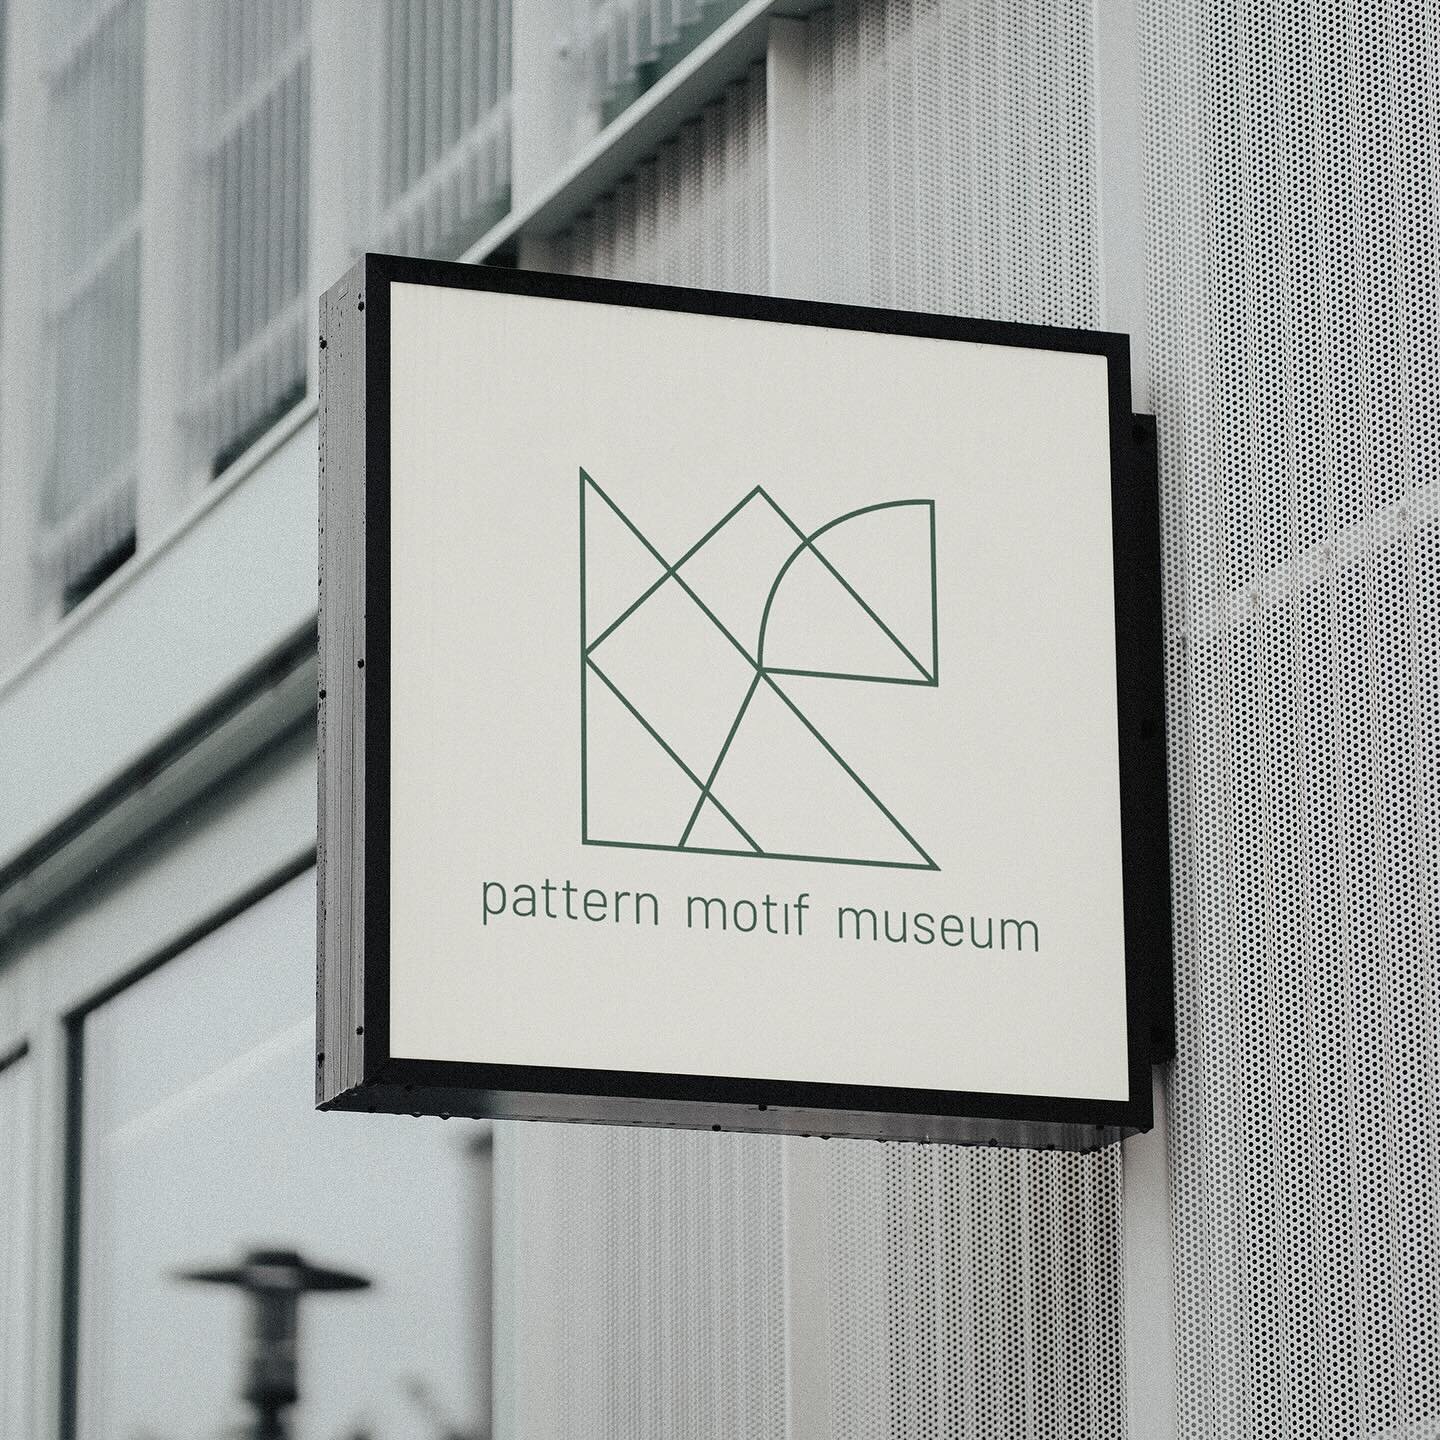 Studio: Semester 2/ Year 2. 
During Semester 2 our task was to create a brand identity for a Pattern Motif Museum. 

We were given creative freedom, allowing us to form our own design characteristics and principles. Here is a selection of material I 